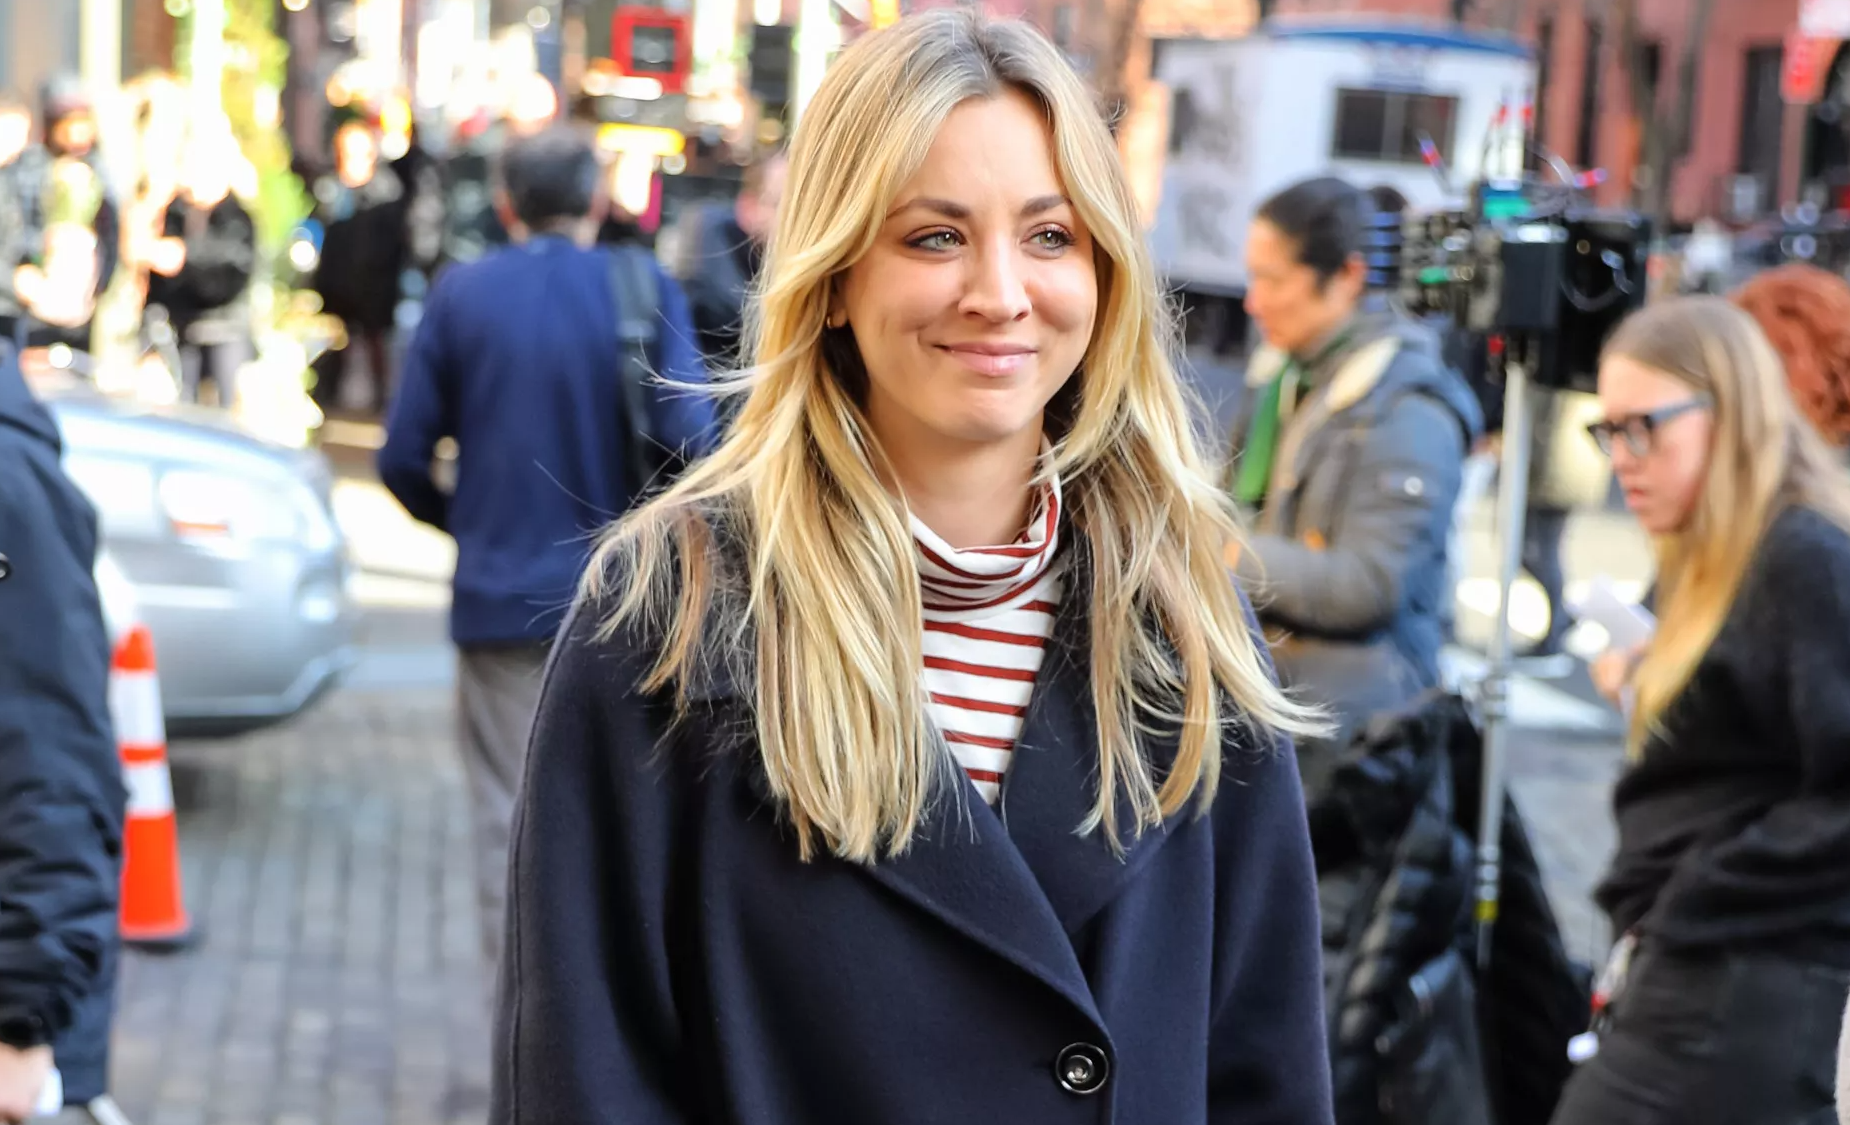 Kaley Cuoco Steals Airport Equipment To Stay Safe: ‘Yeah, I Did Grab These’